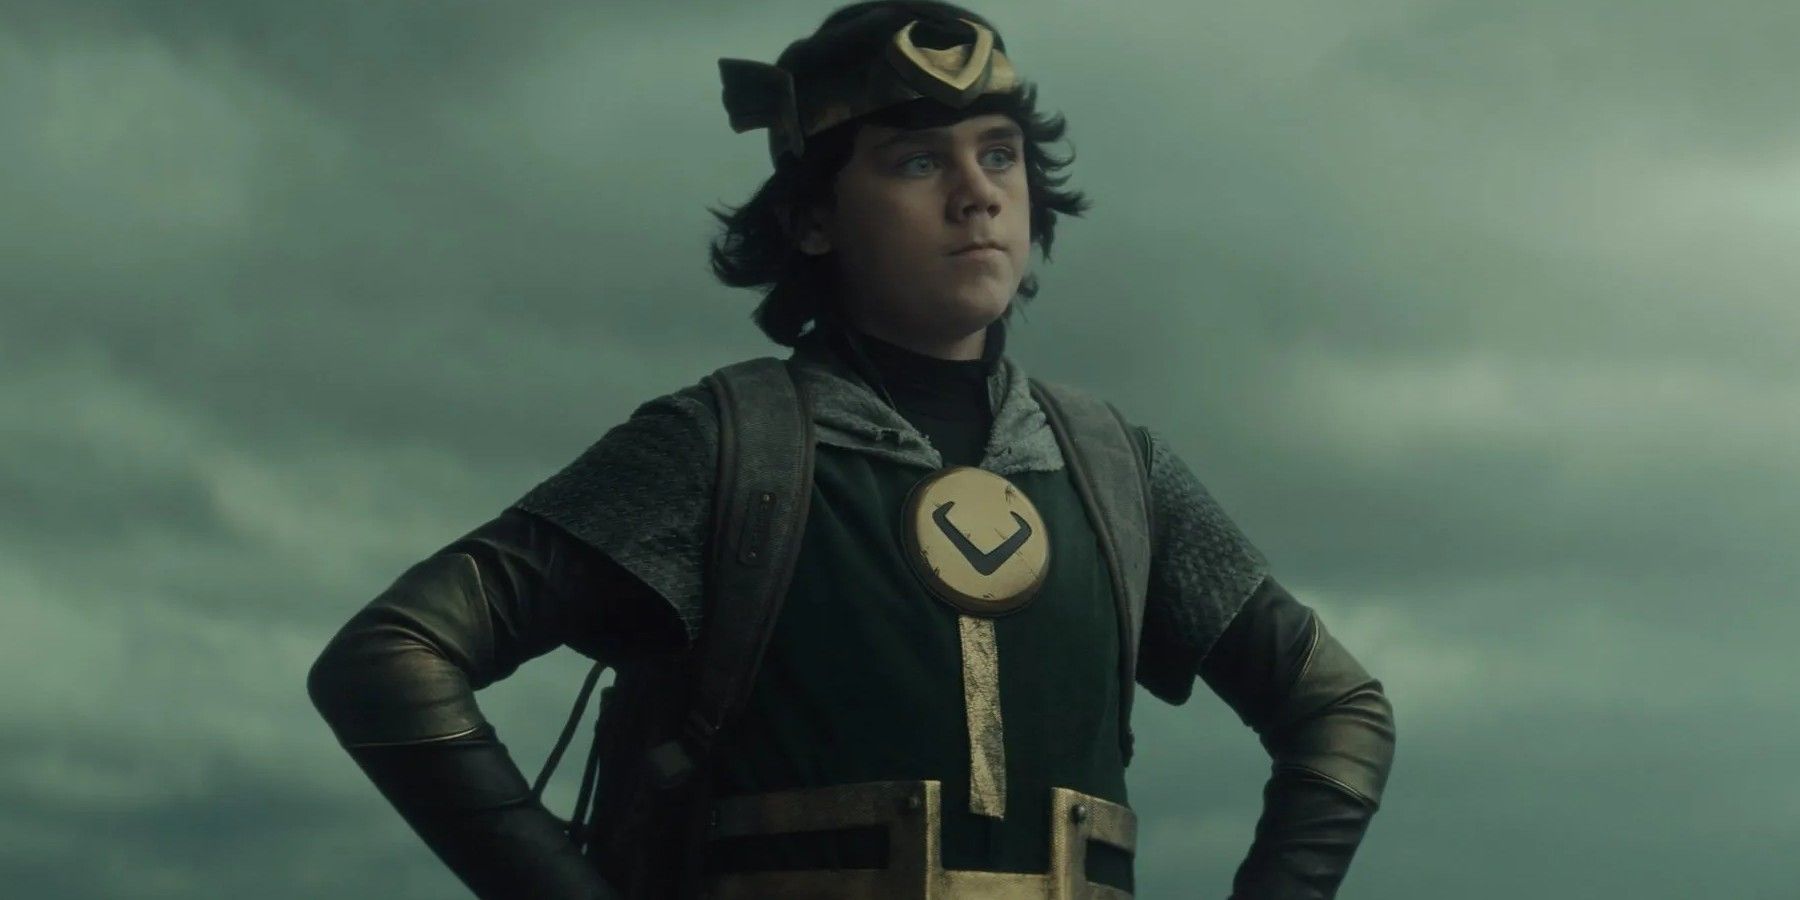 Kid Loki standing with his hands on his hips in Loki